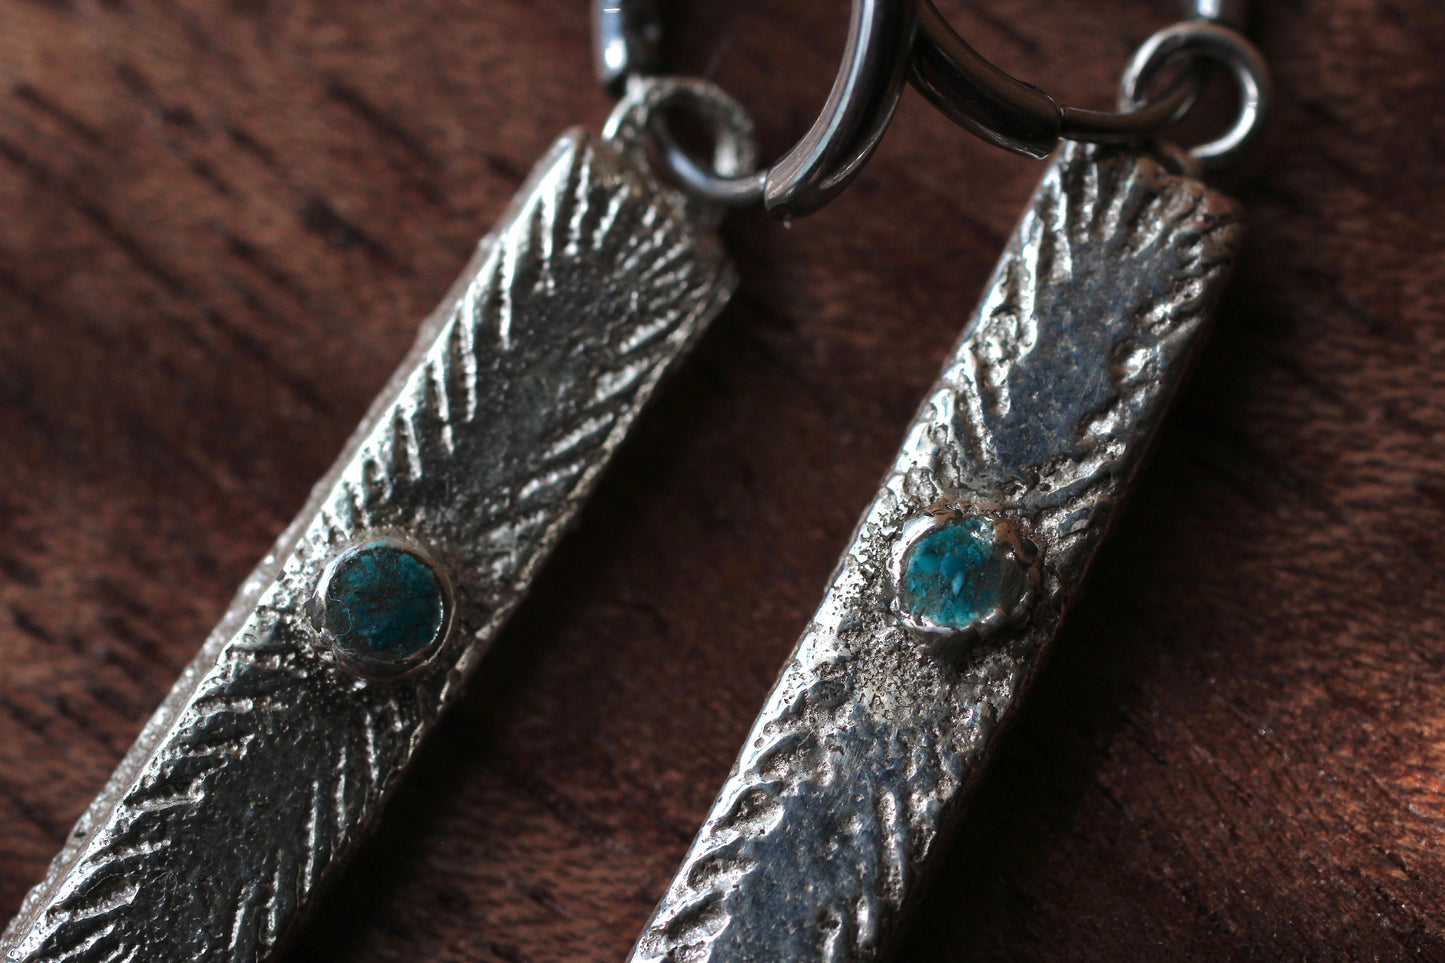 Sand Casted Earrings #3 | Turquoise